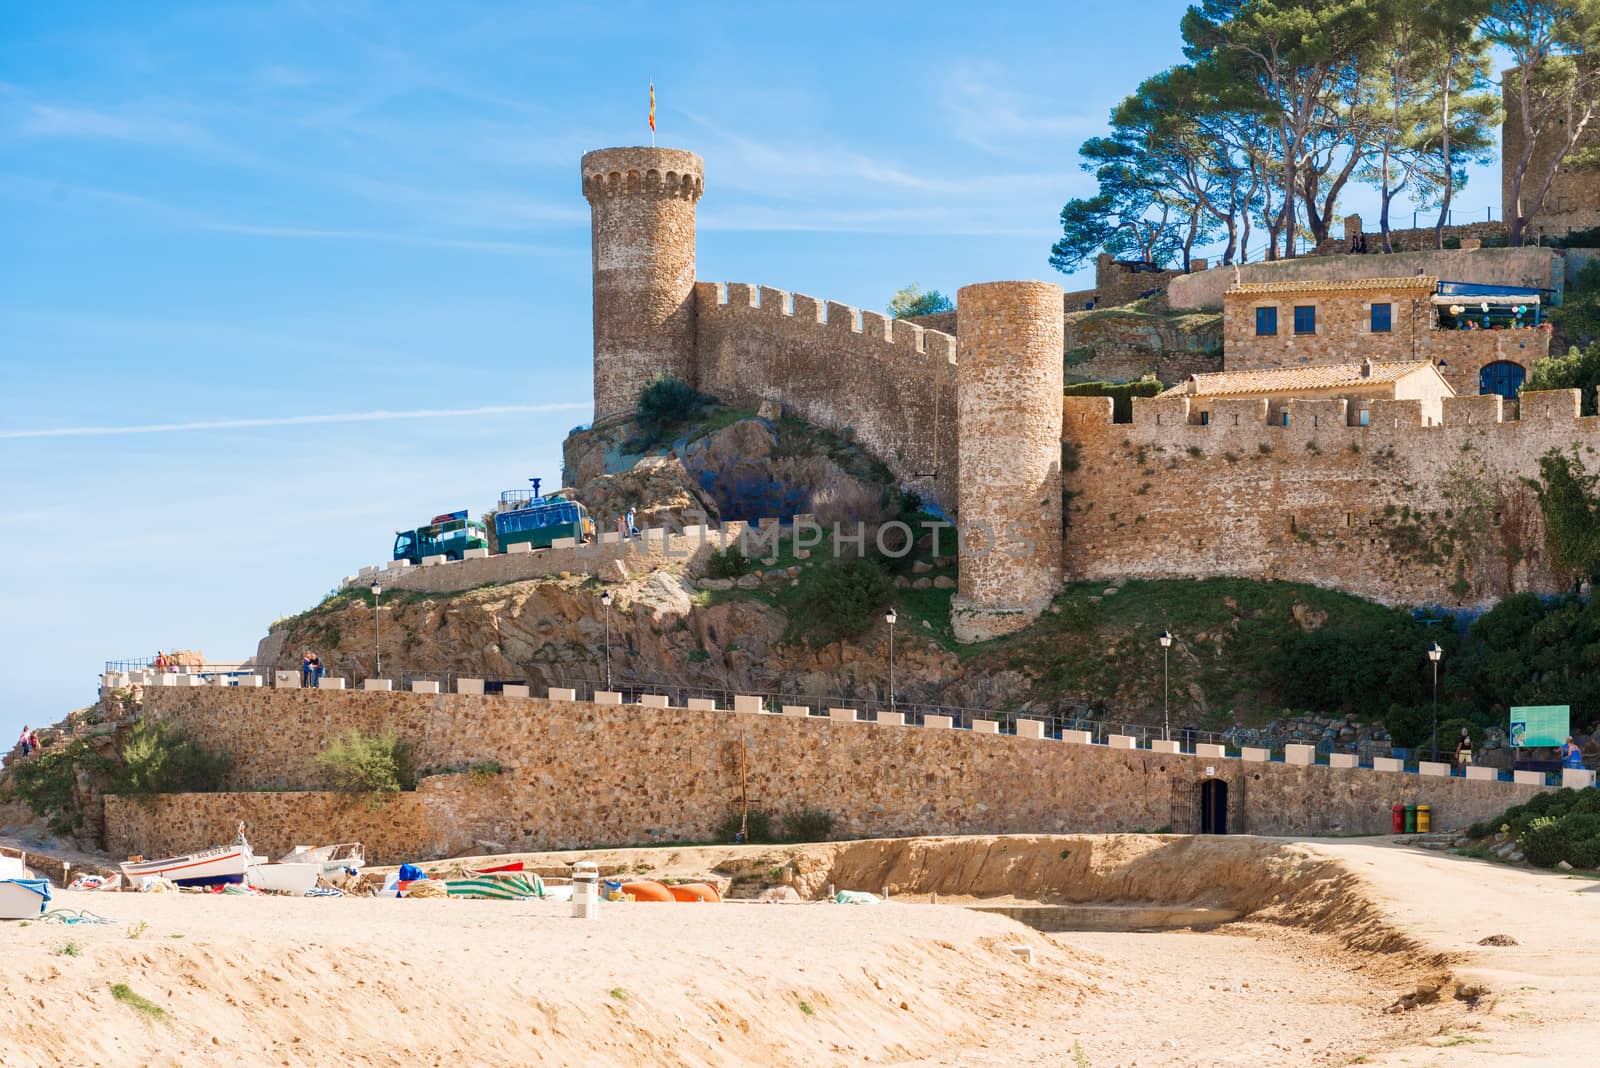 Beach and medieval castle in Tossa de Mar, Spain by Marcus